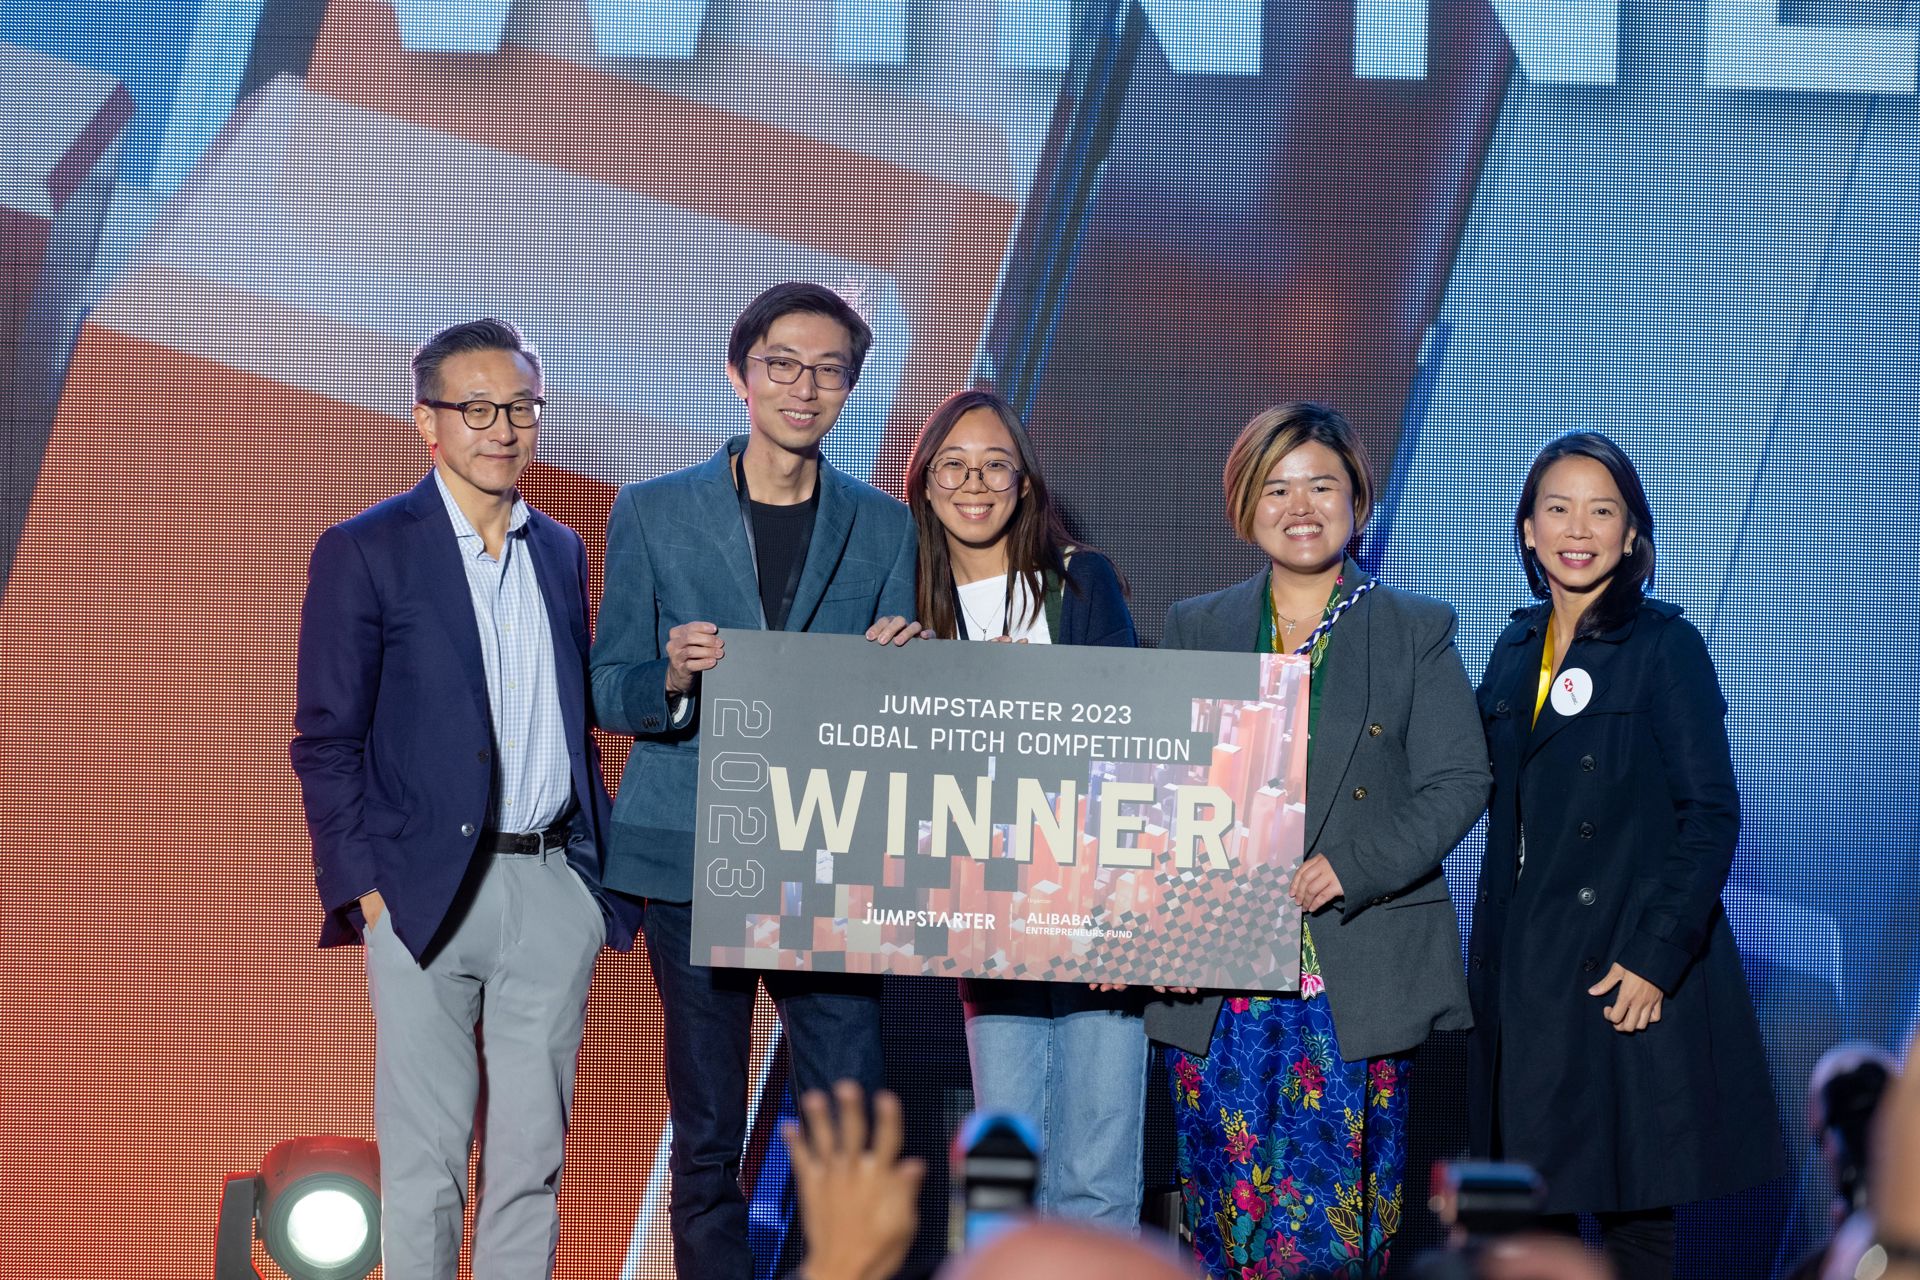 Photo shows Allegrow Biotech, a Hong Kong-based biotechnology company, emerging as the winner of the global pitching competition JUMPSTARTER 2023.